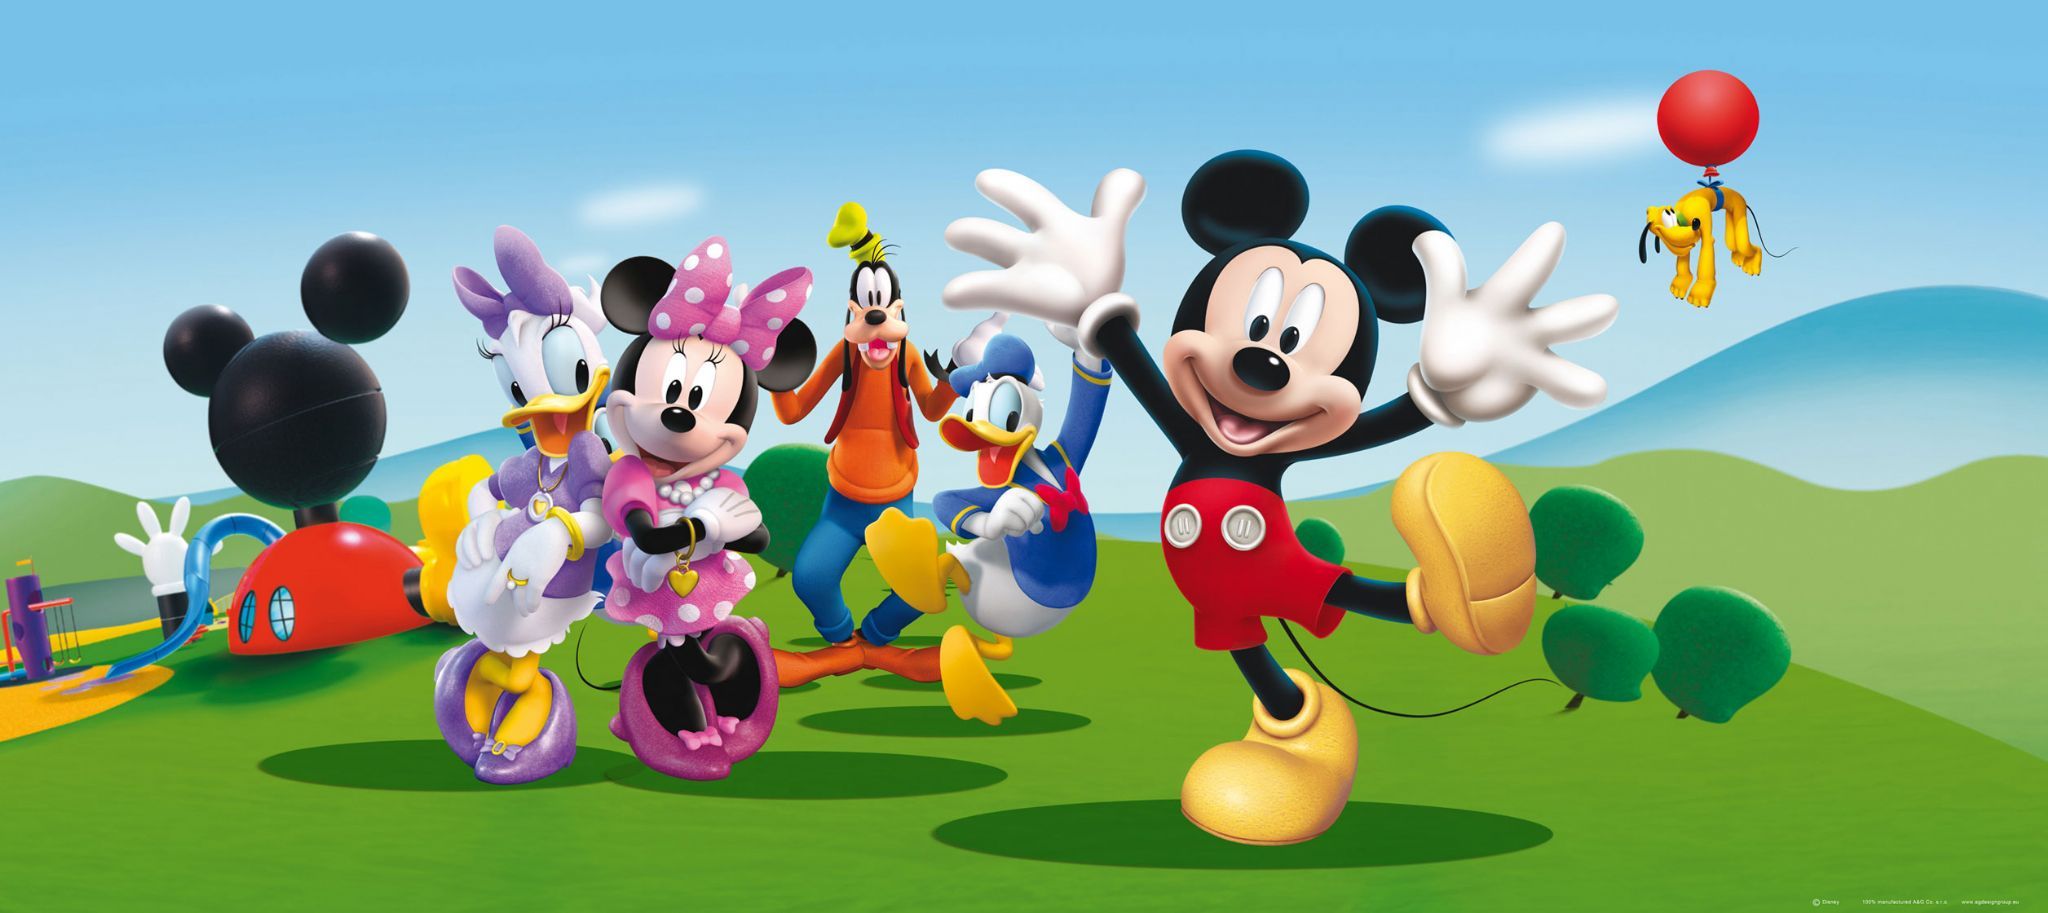 Disney Mickey Mouse Premium wall murals. Buy it now